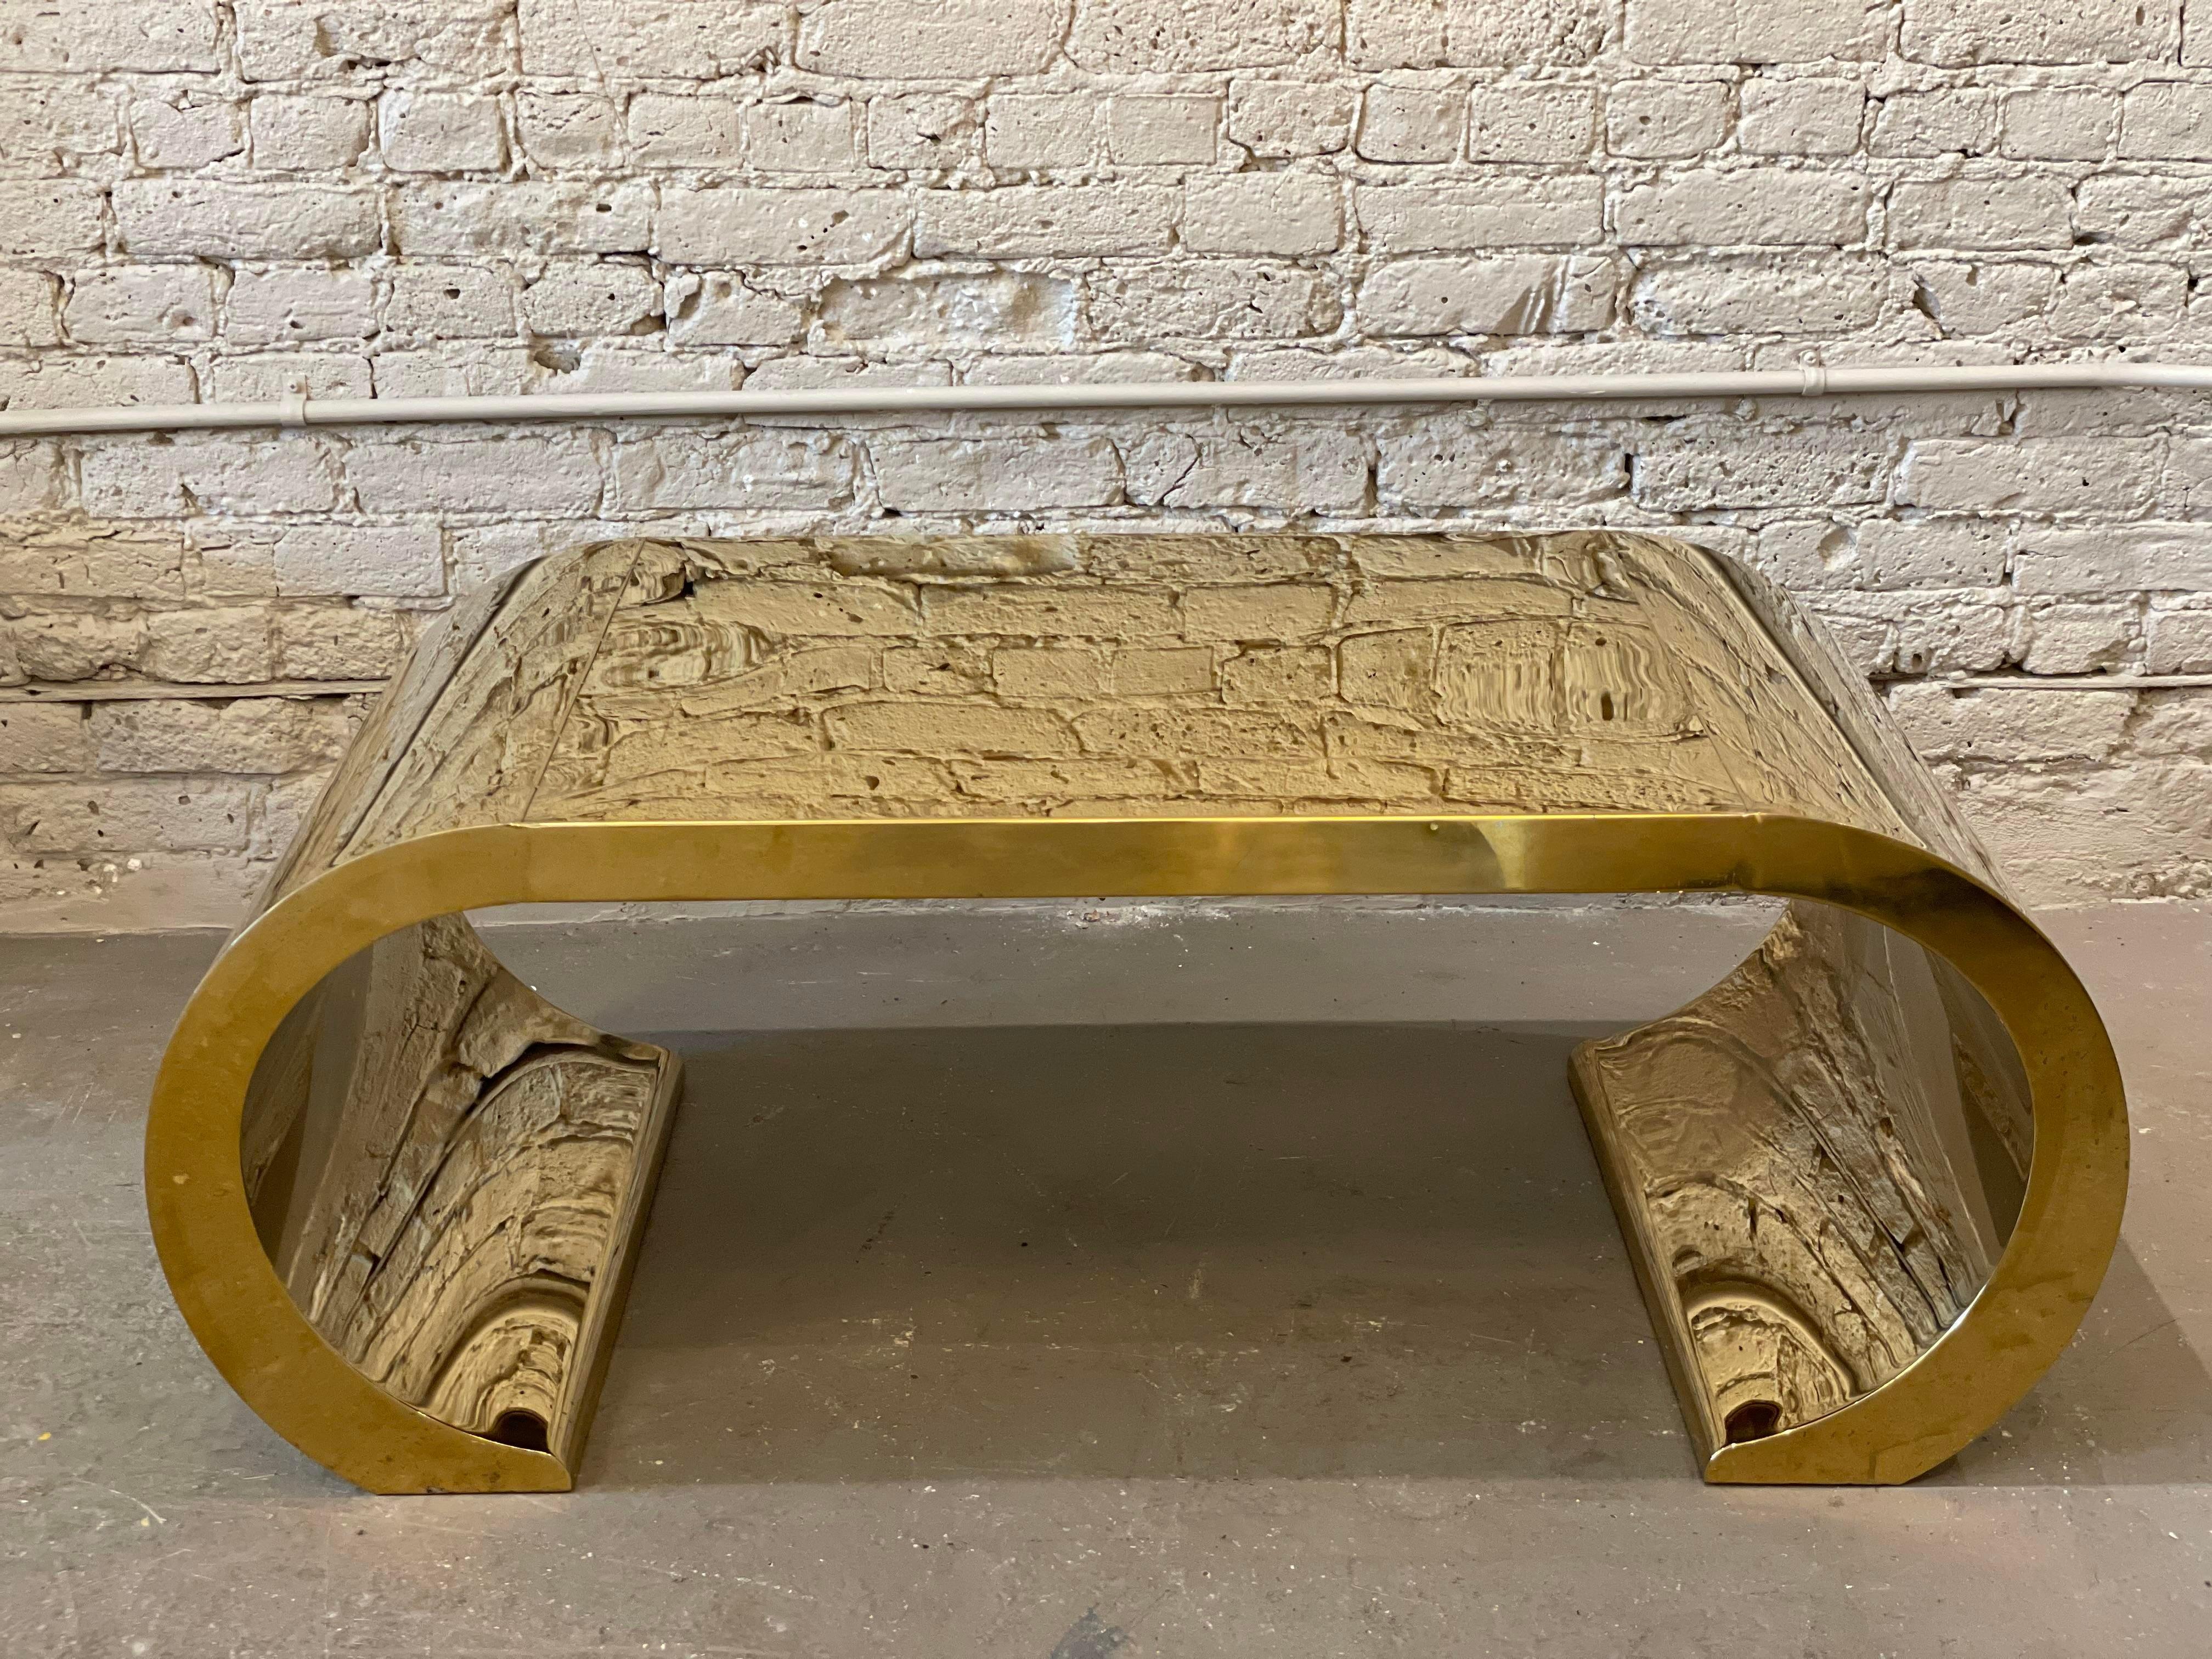 Have you ever seen a table like this? The beautiful shape and brass make this simply stunning. There are a few dings and scratch marks that come with age but overall this is in incredible condition and a statement piece for sure!